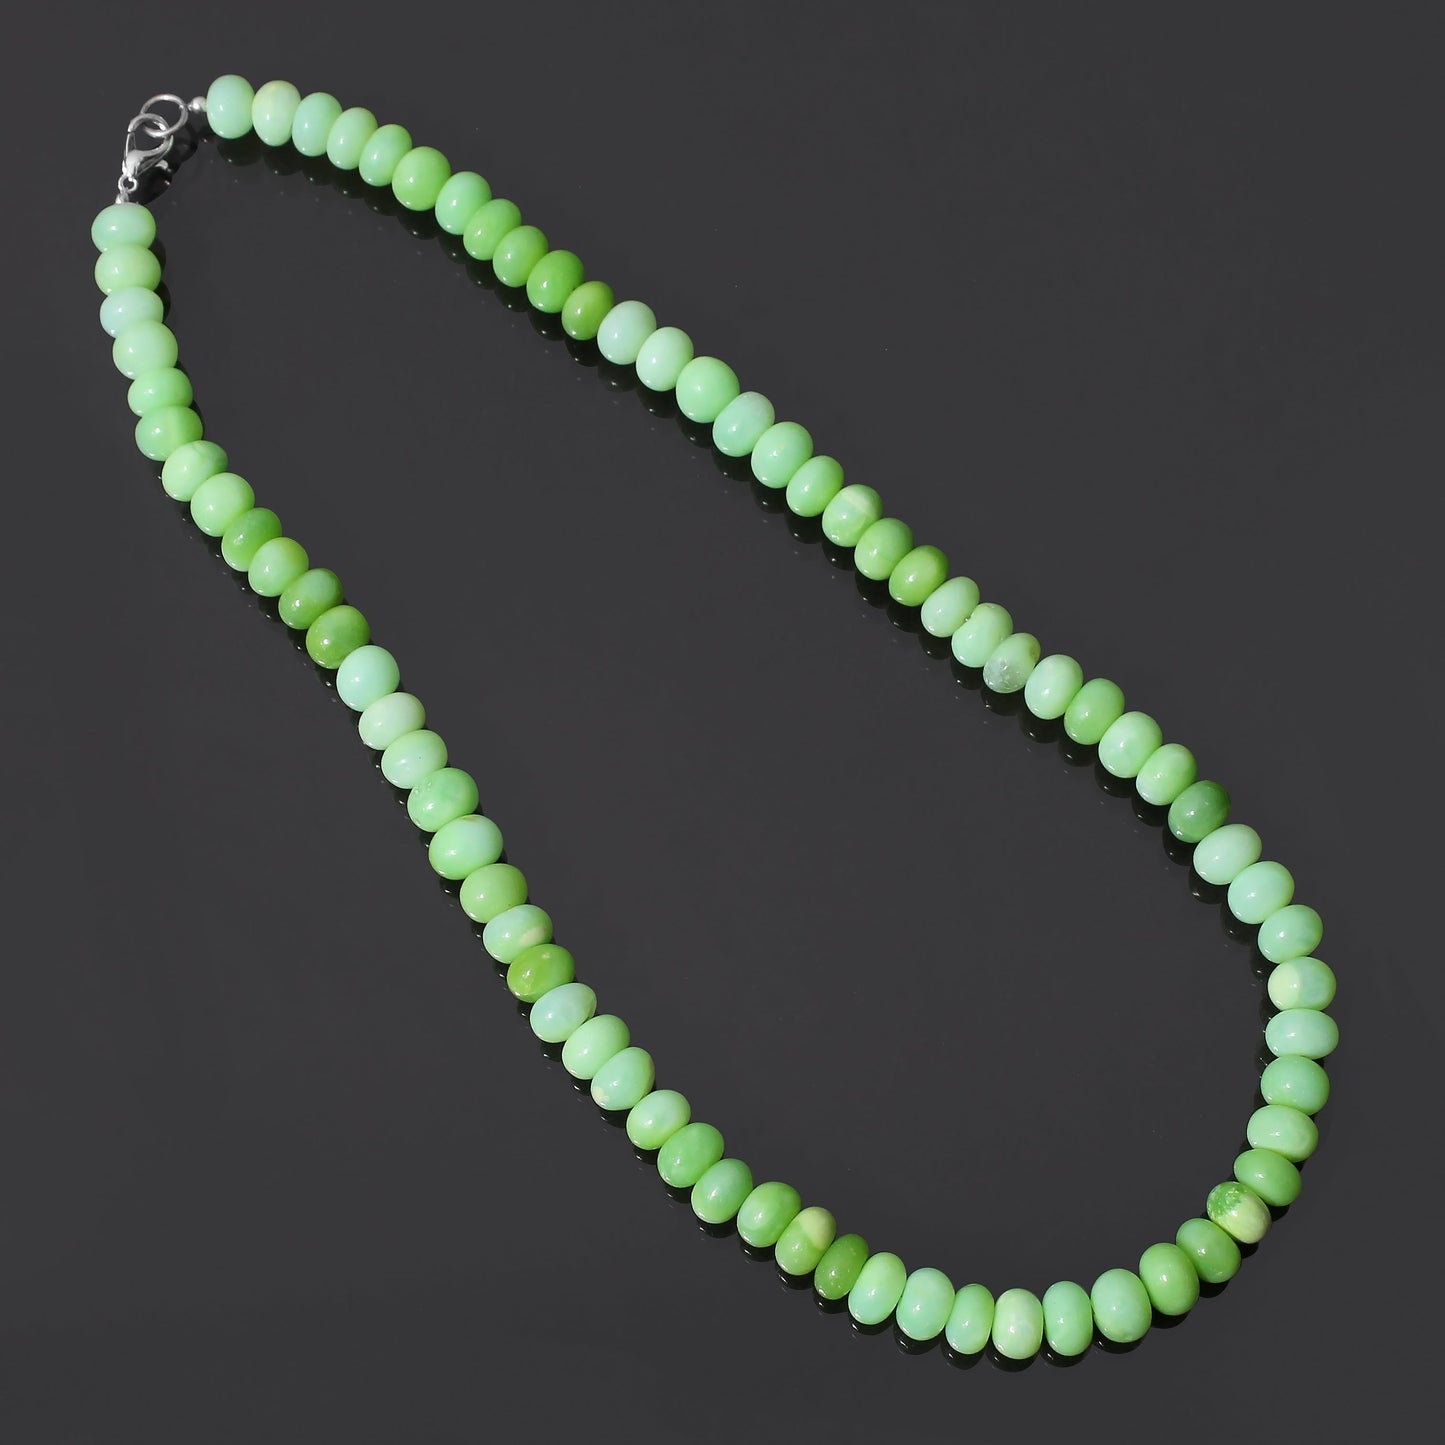 Peruvian Green Opal Beaded Necklace, Casual Wear Necklace For Her/Him GemsRush